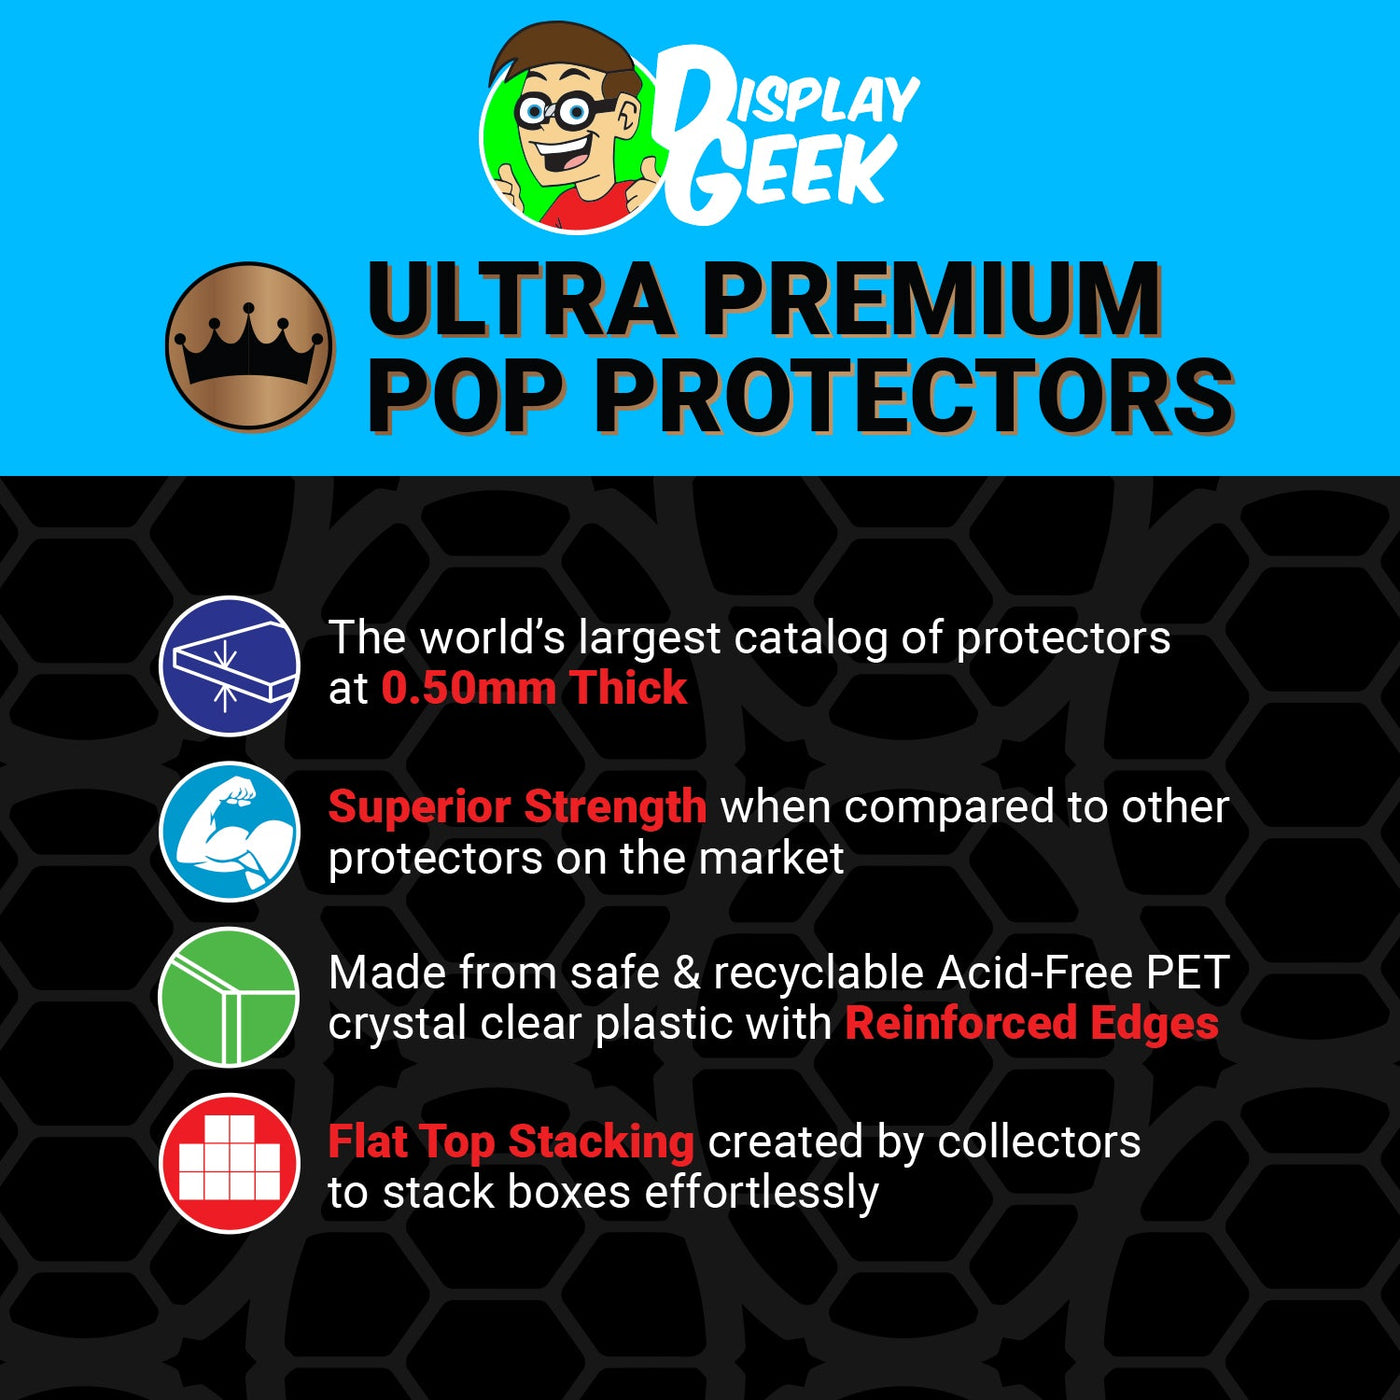 Pop Protector for Freddy Funko as Boo Berry SDCC LE 48 on The Protector Guide App by Display Geek